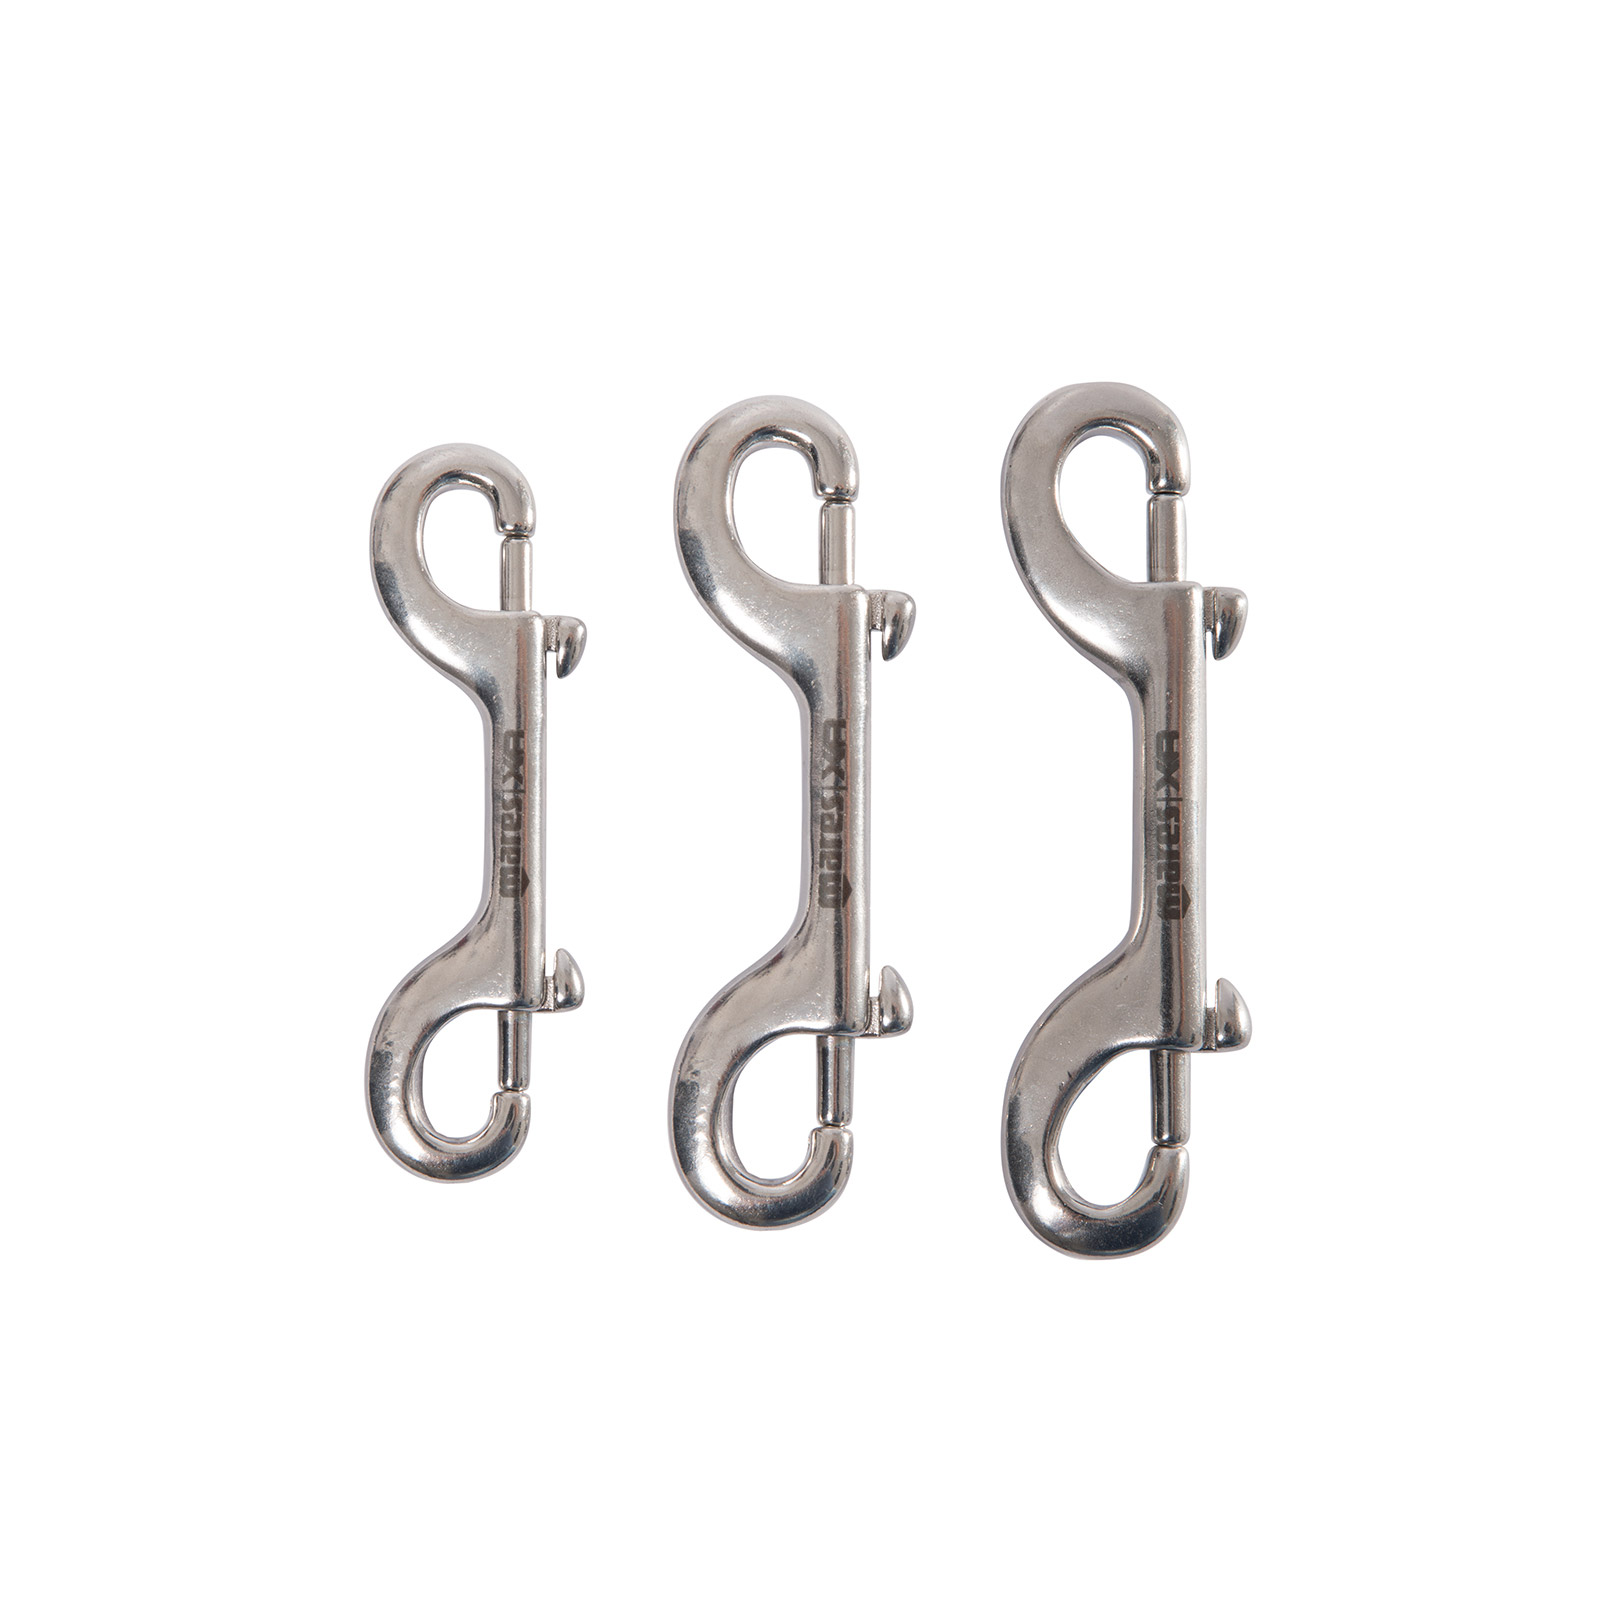 Mares Double Ender Stainless Steel - 120mm